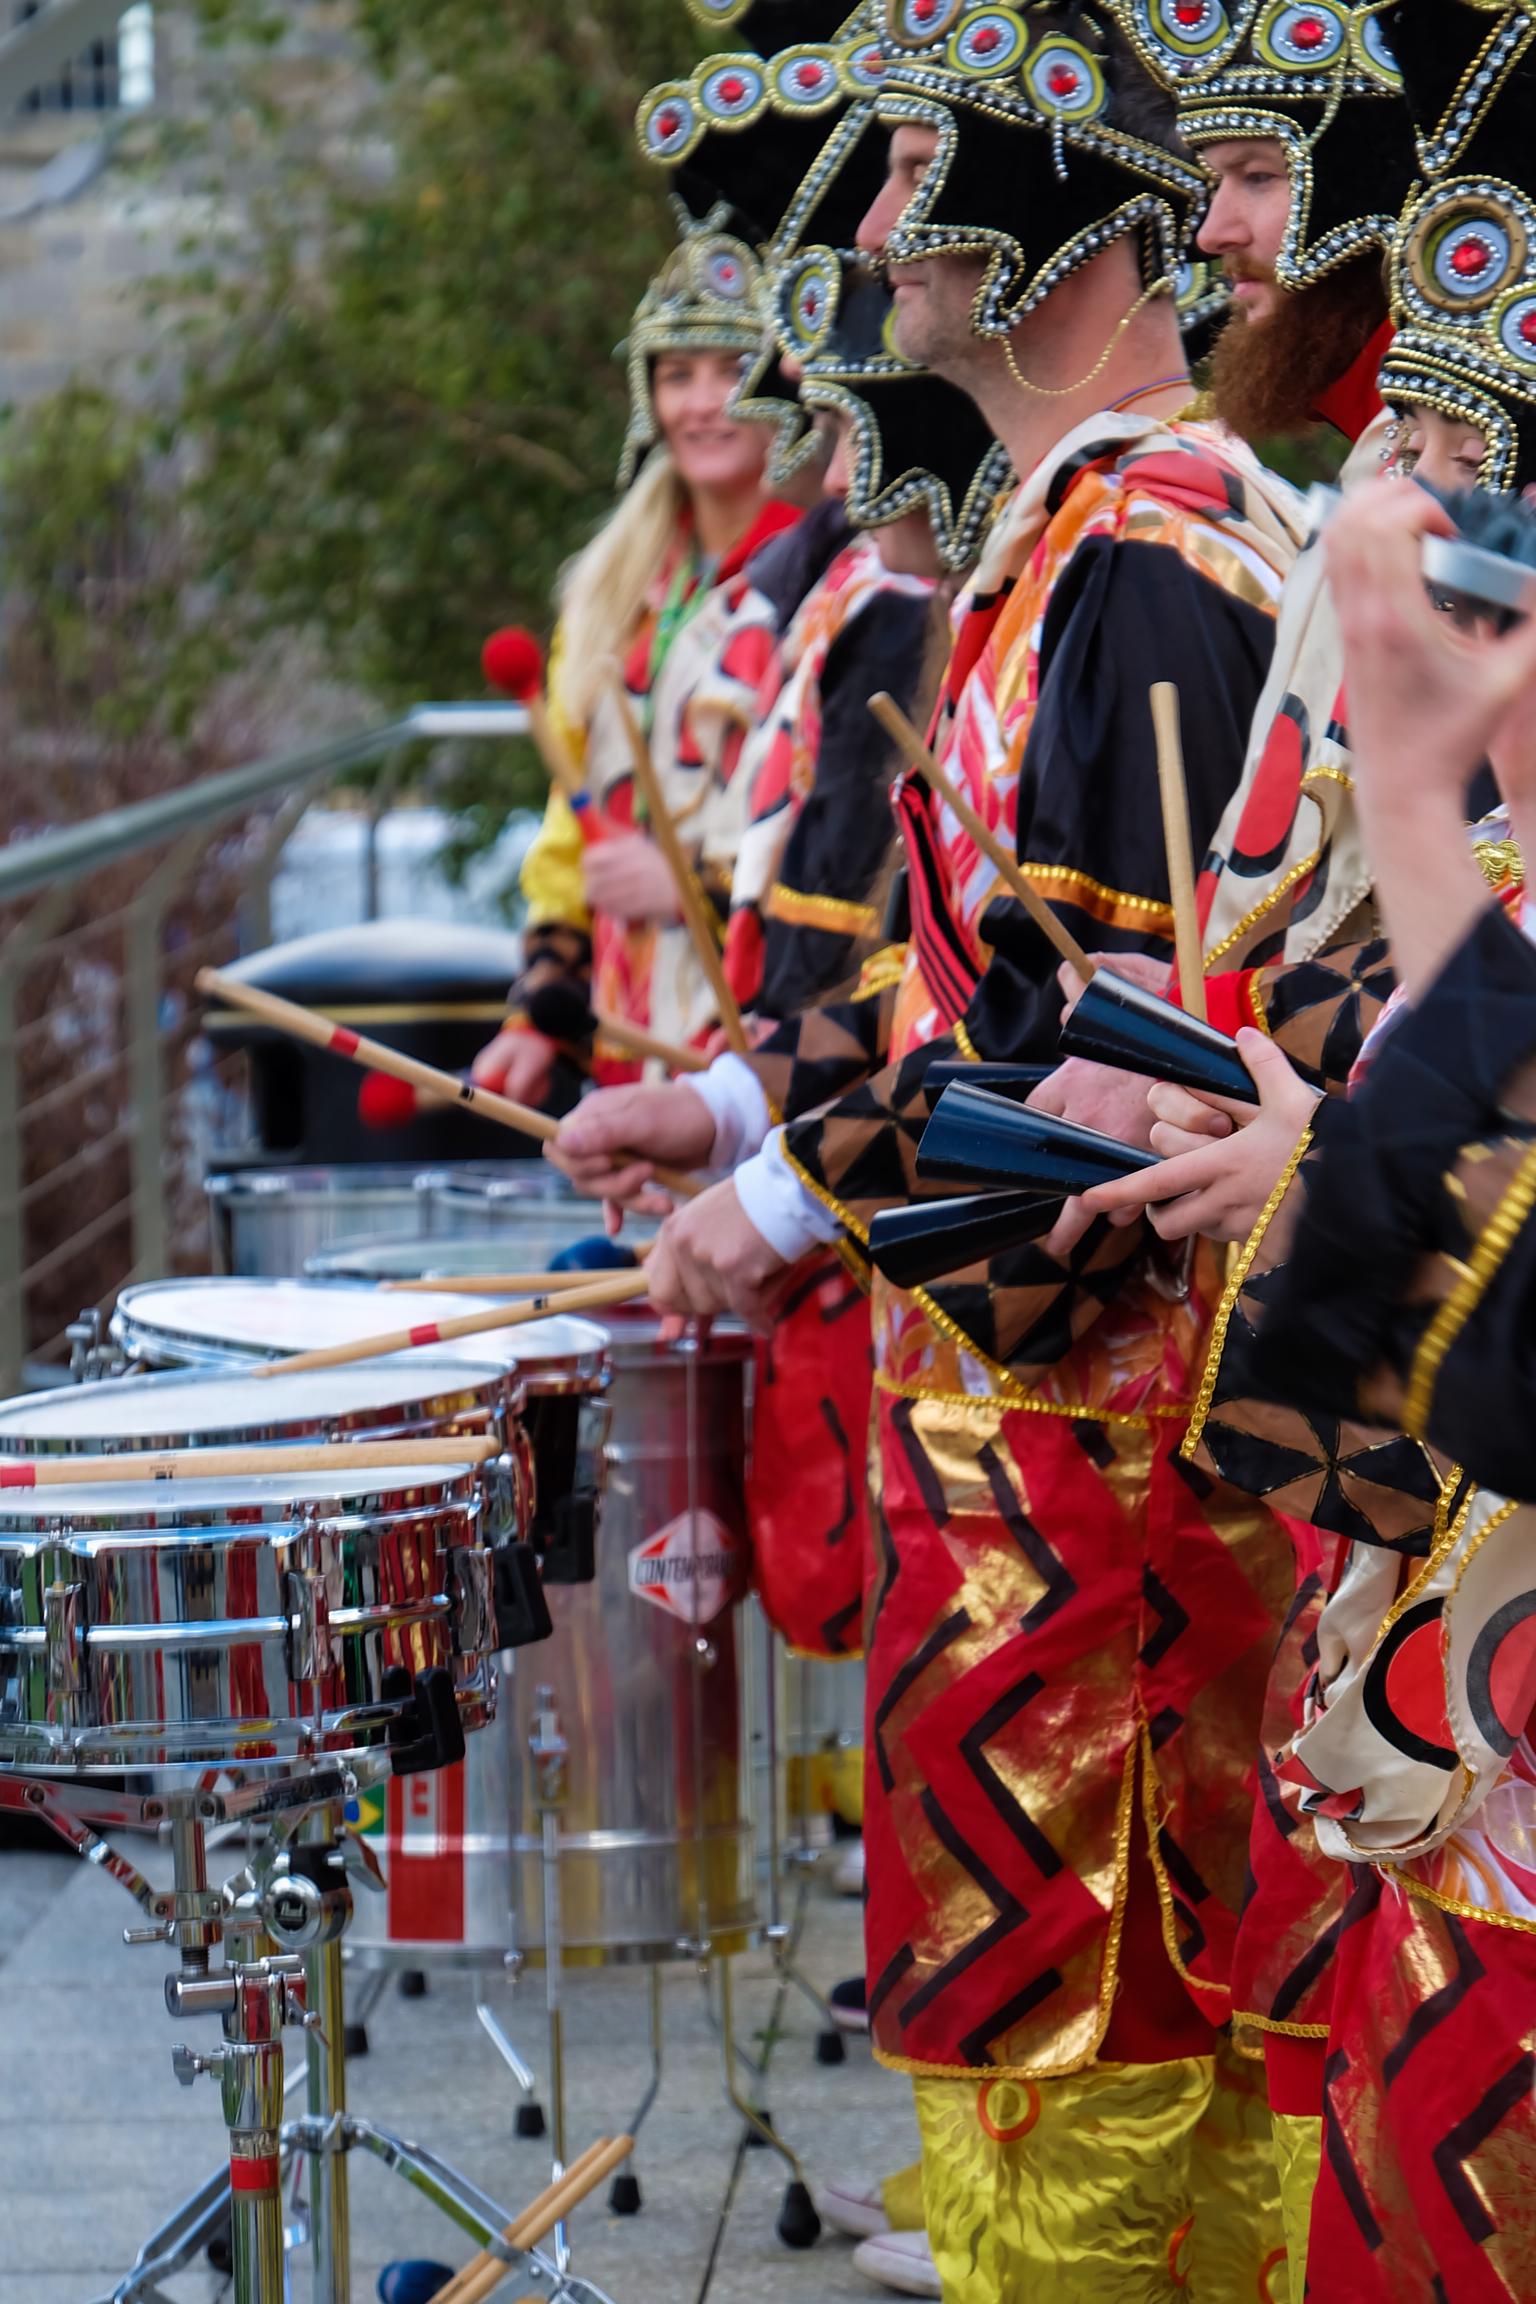 SAMBA BAND IN COLOURFUL SEQUENCED COSTUMES AND HEADDRESS PLAYING MUSIC AT VEGFEST.